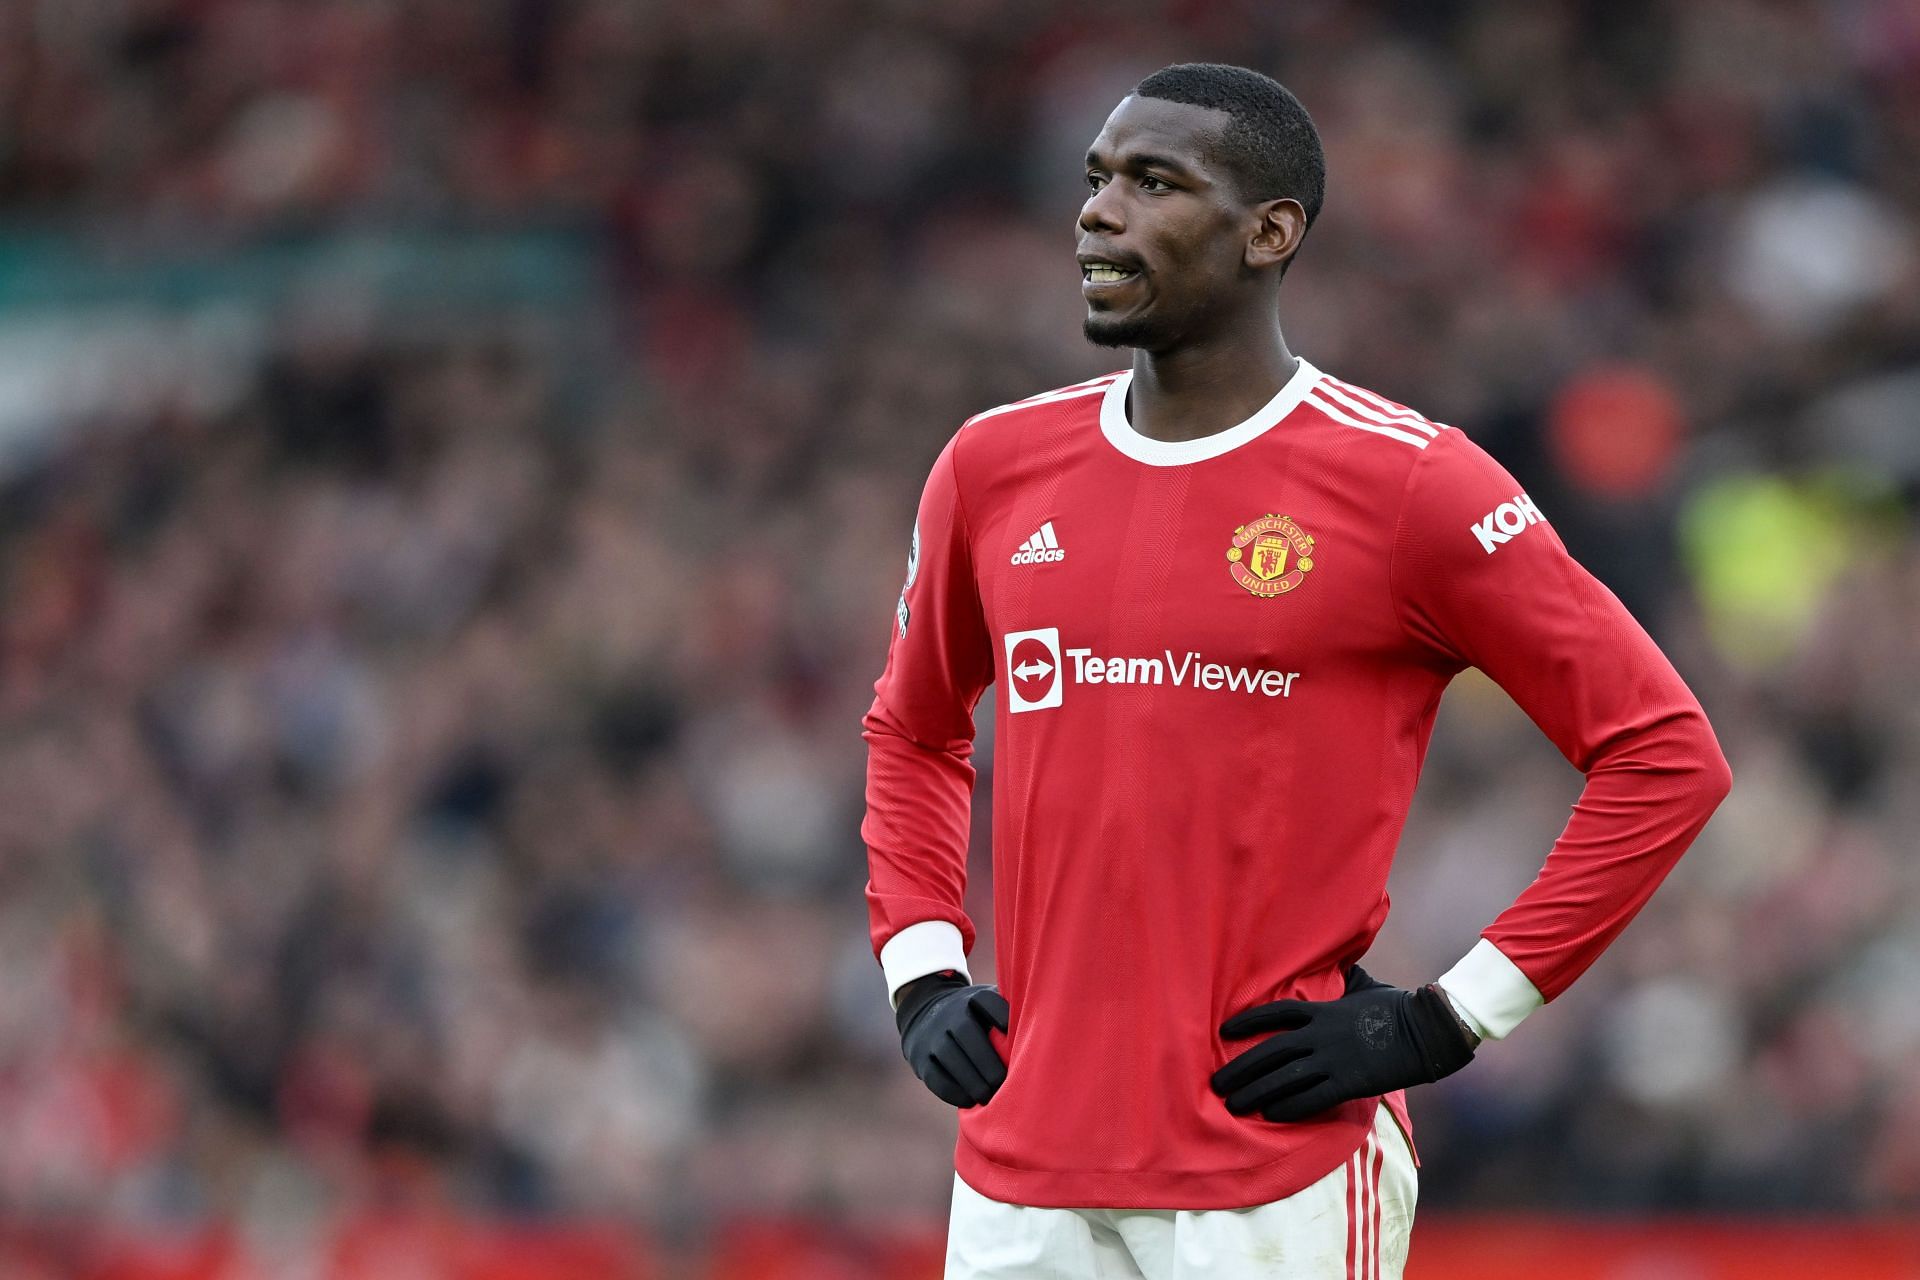 Paul Pogba is yet to sign a new deal with Manchester United.